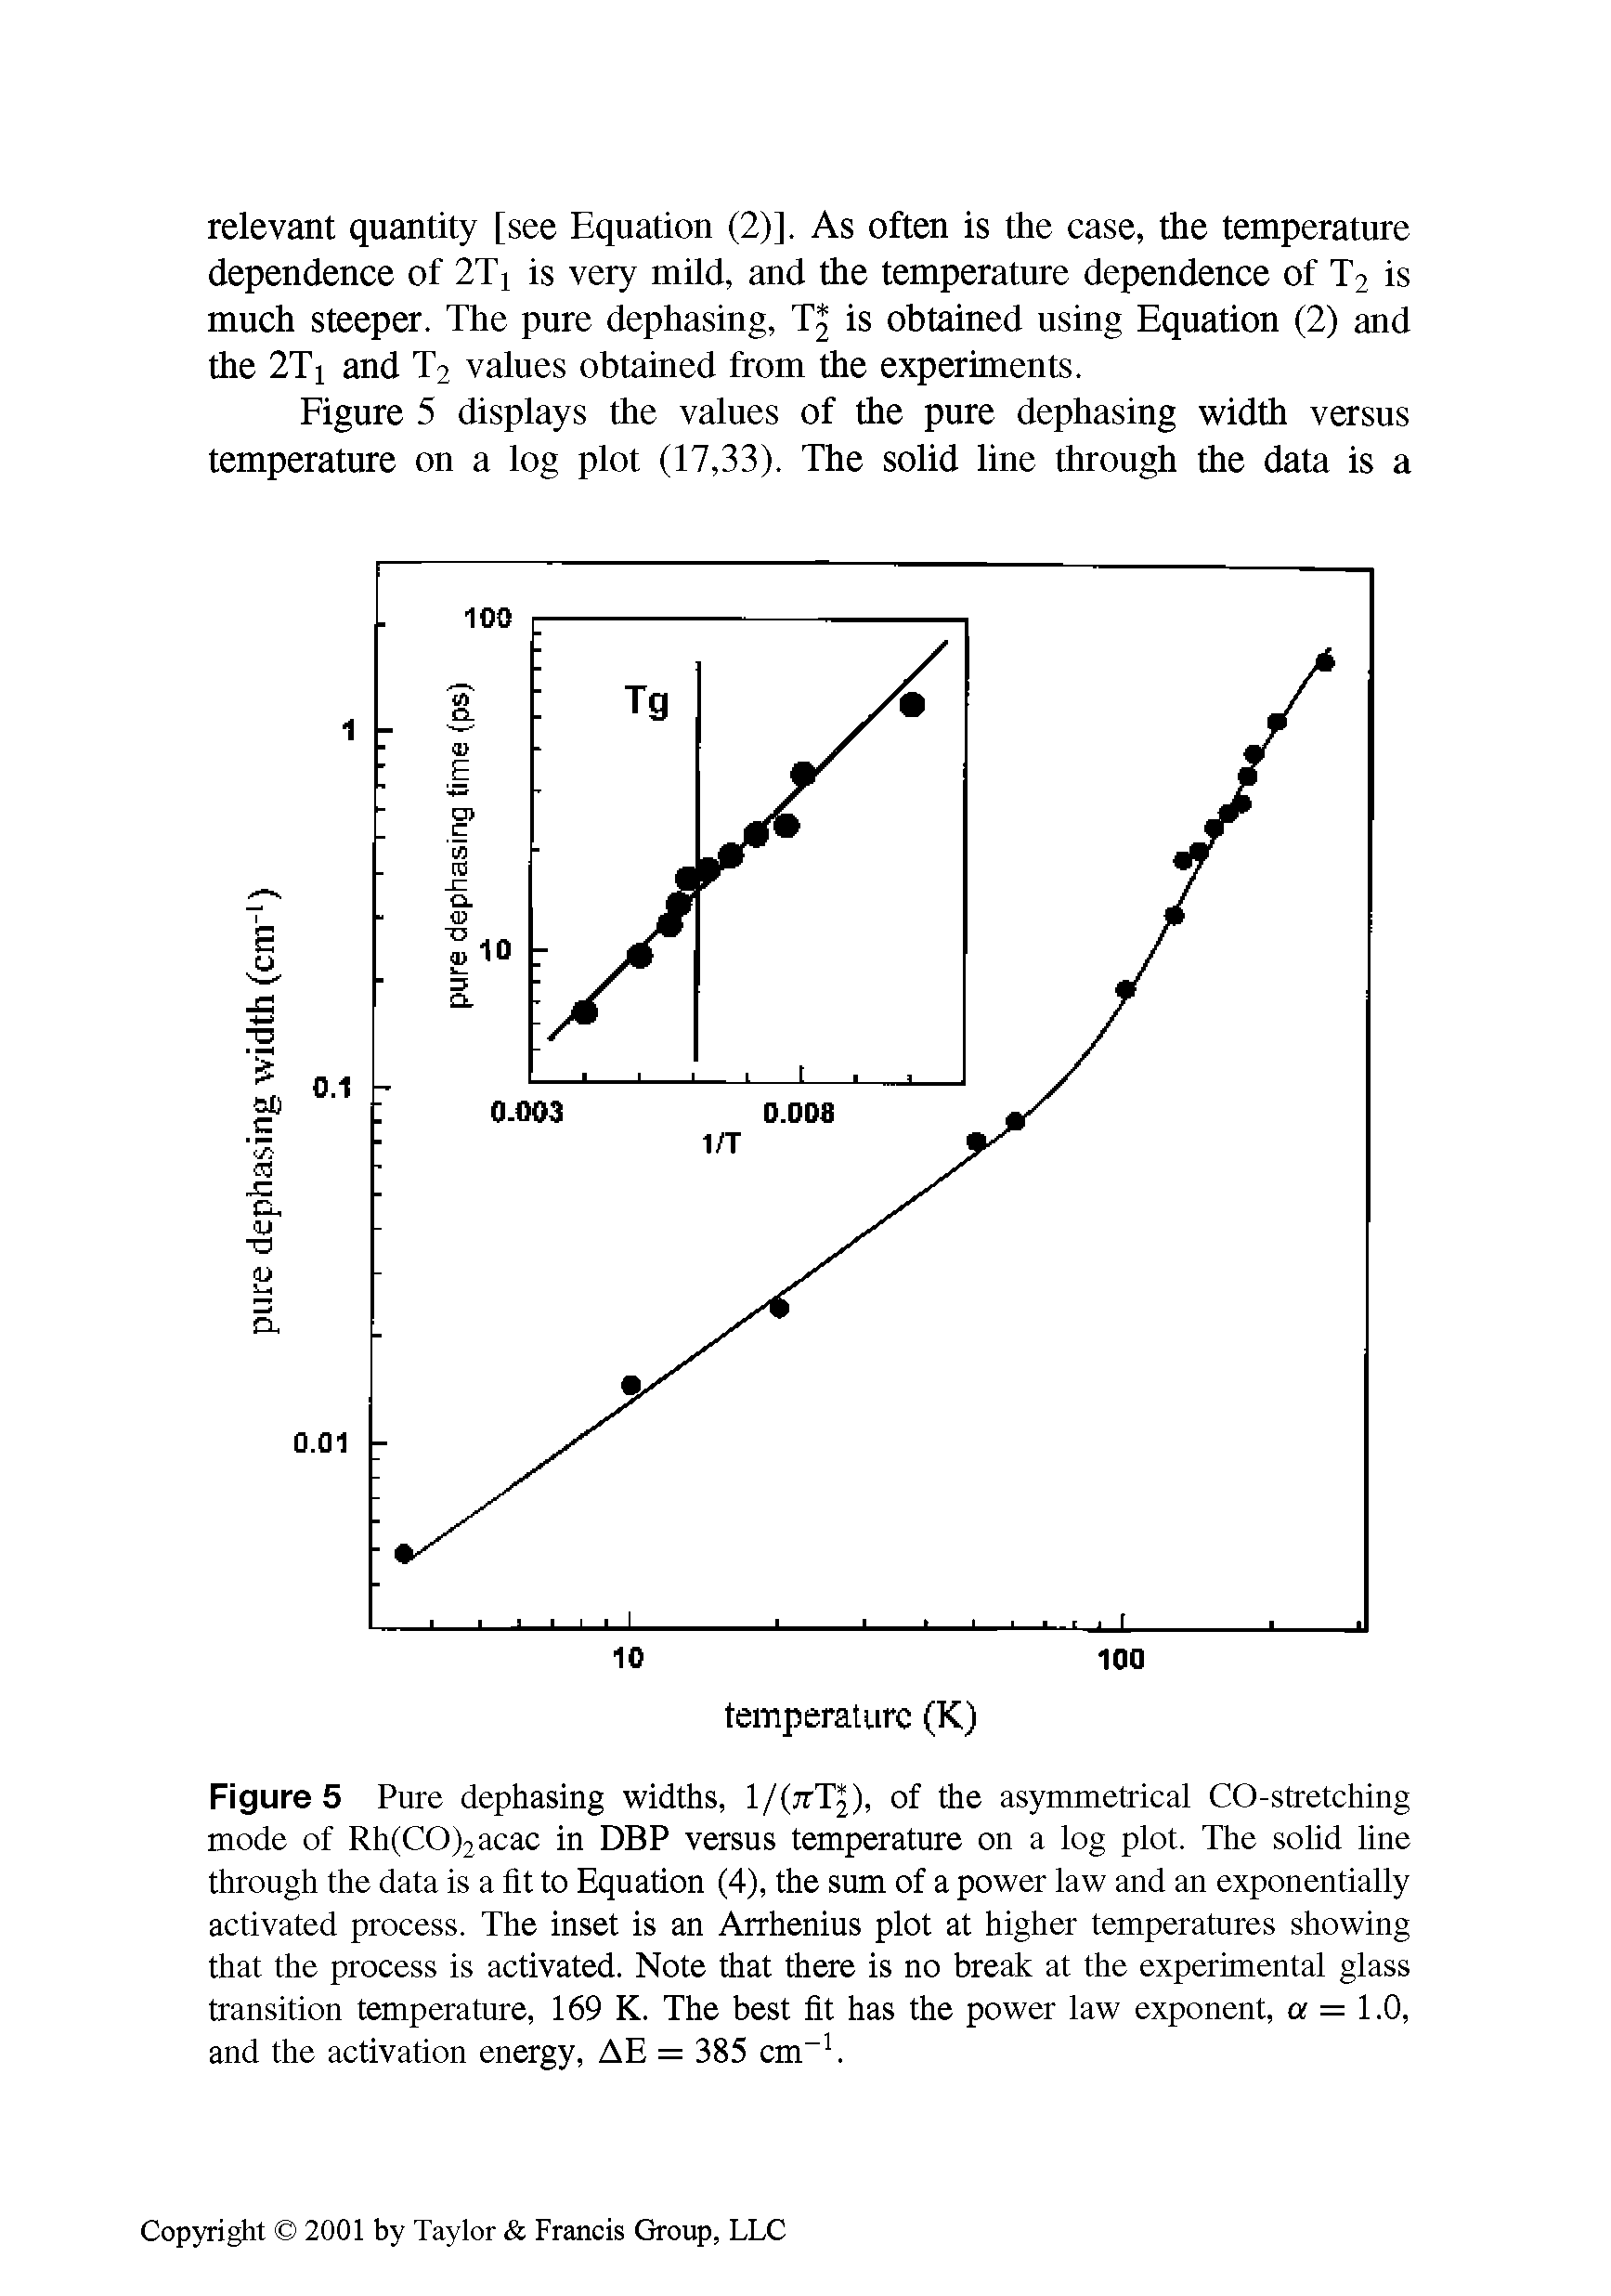 Figure 5 Pure dephasing widths, l/inT]), of the asymmetrical CO-stretching mode of Rh(CO)2acac in DBP versus temperature on a log plot. The solid line through the data is a tit to Equation (4), the sum of a power law and an exponentially activated process. The inset is an Arrhenius plot at higher temperatures showing that the process is activated. Note that there is no break at the experimental glass transition temperature, 169 K. The best fit has the power law exponent, a = 1.0, and the activation energy, AE = 385 cm-1.